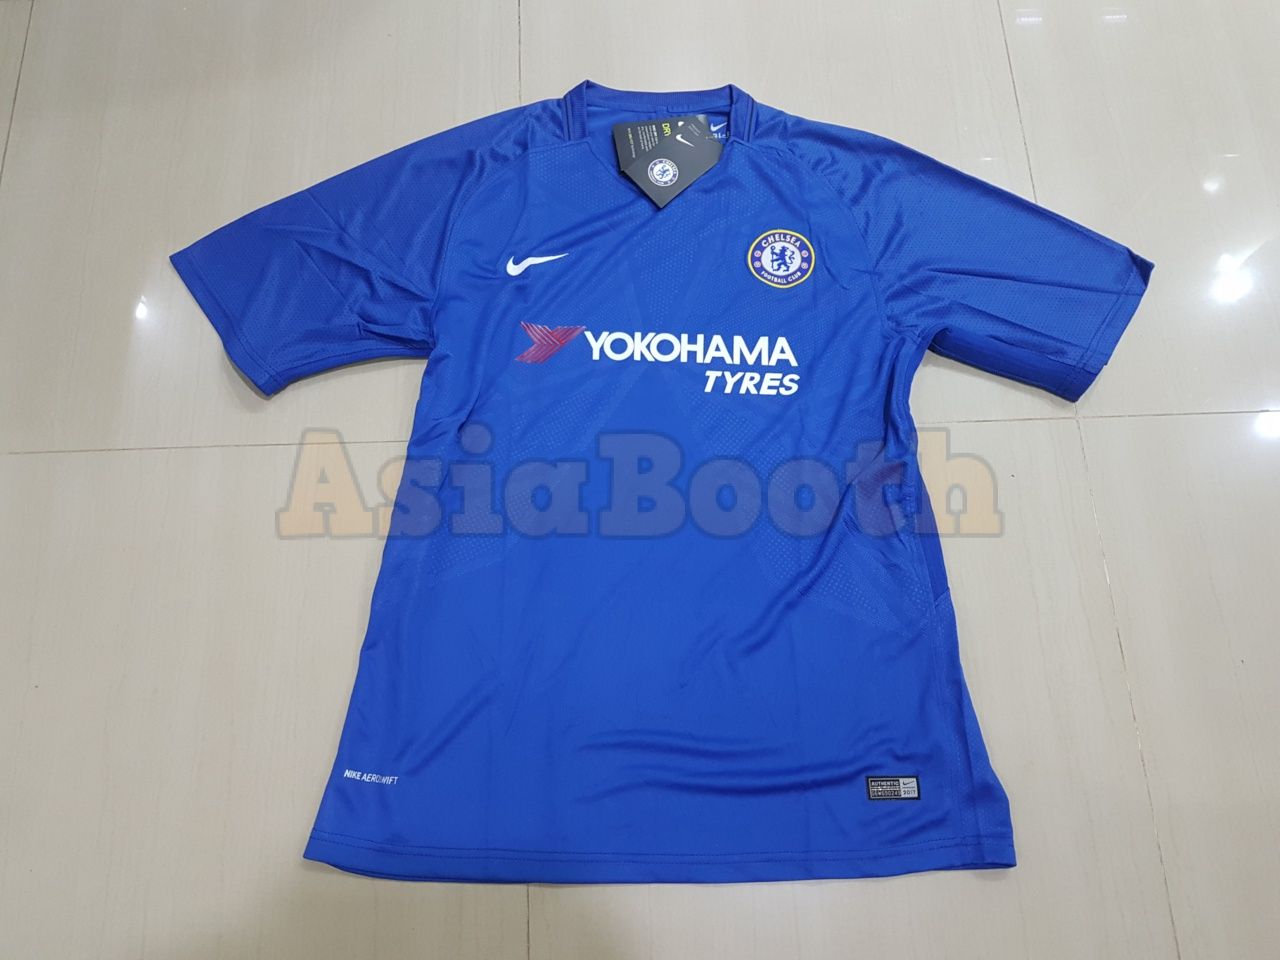 chelsea jersey personalized